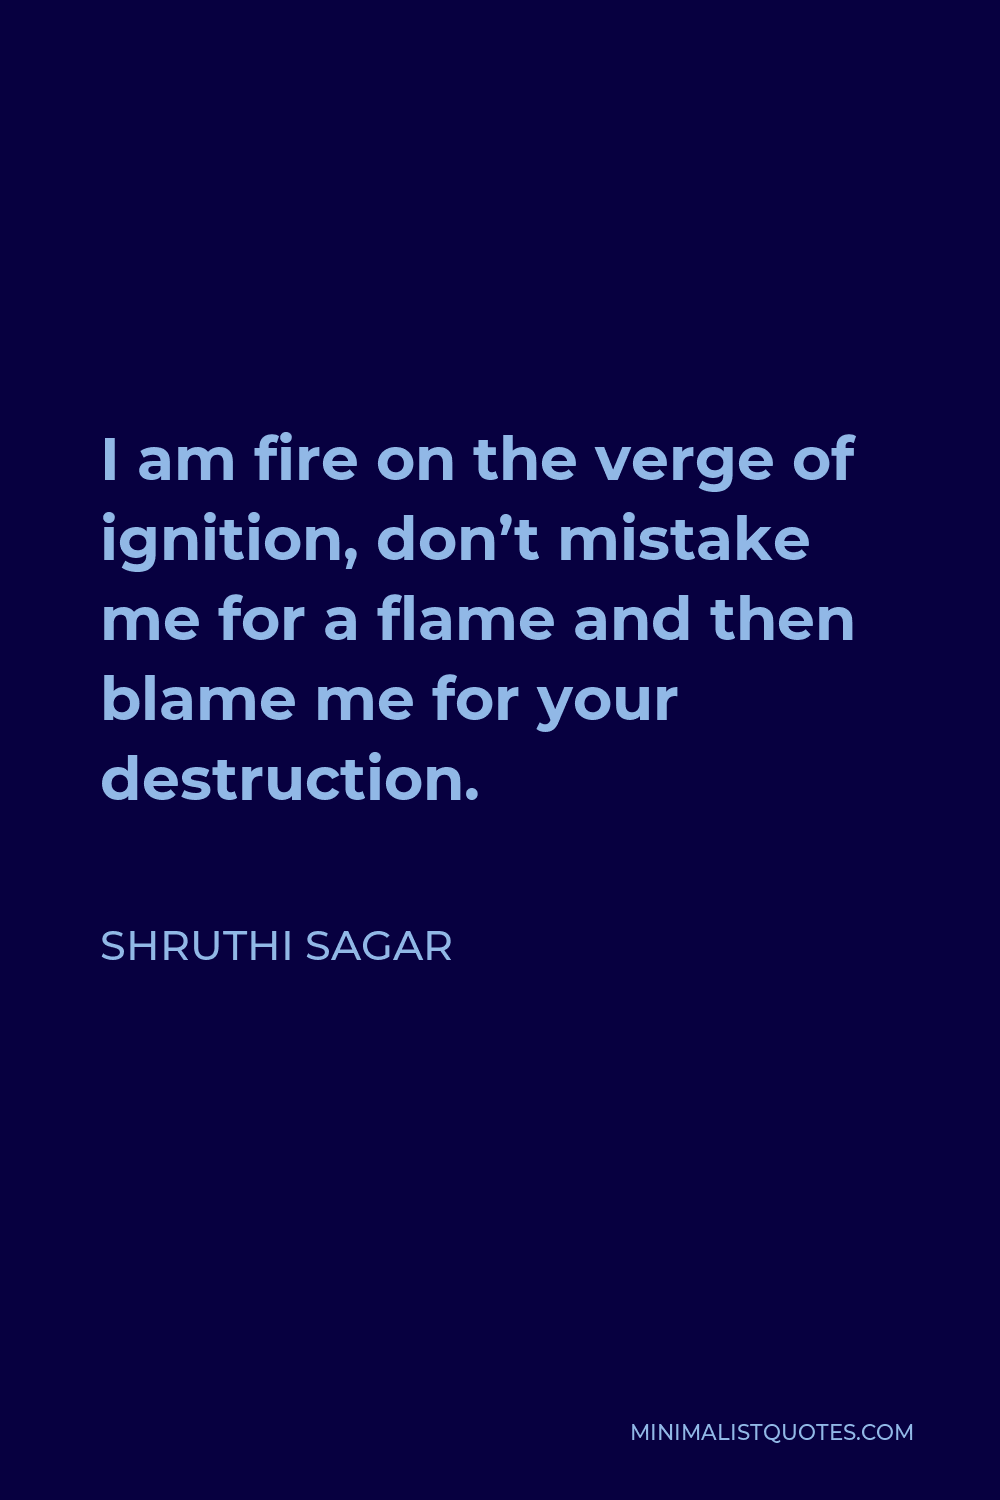 Shruthi Sagar Quote - I am fire on the verge of ignition, don’t mistake me for a flame and then blame me for your destruction.